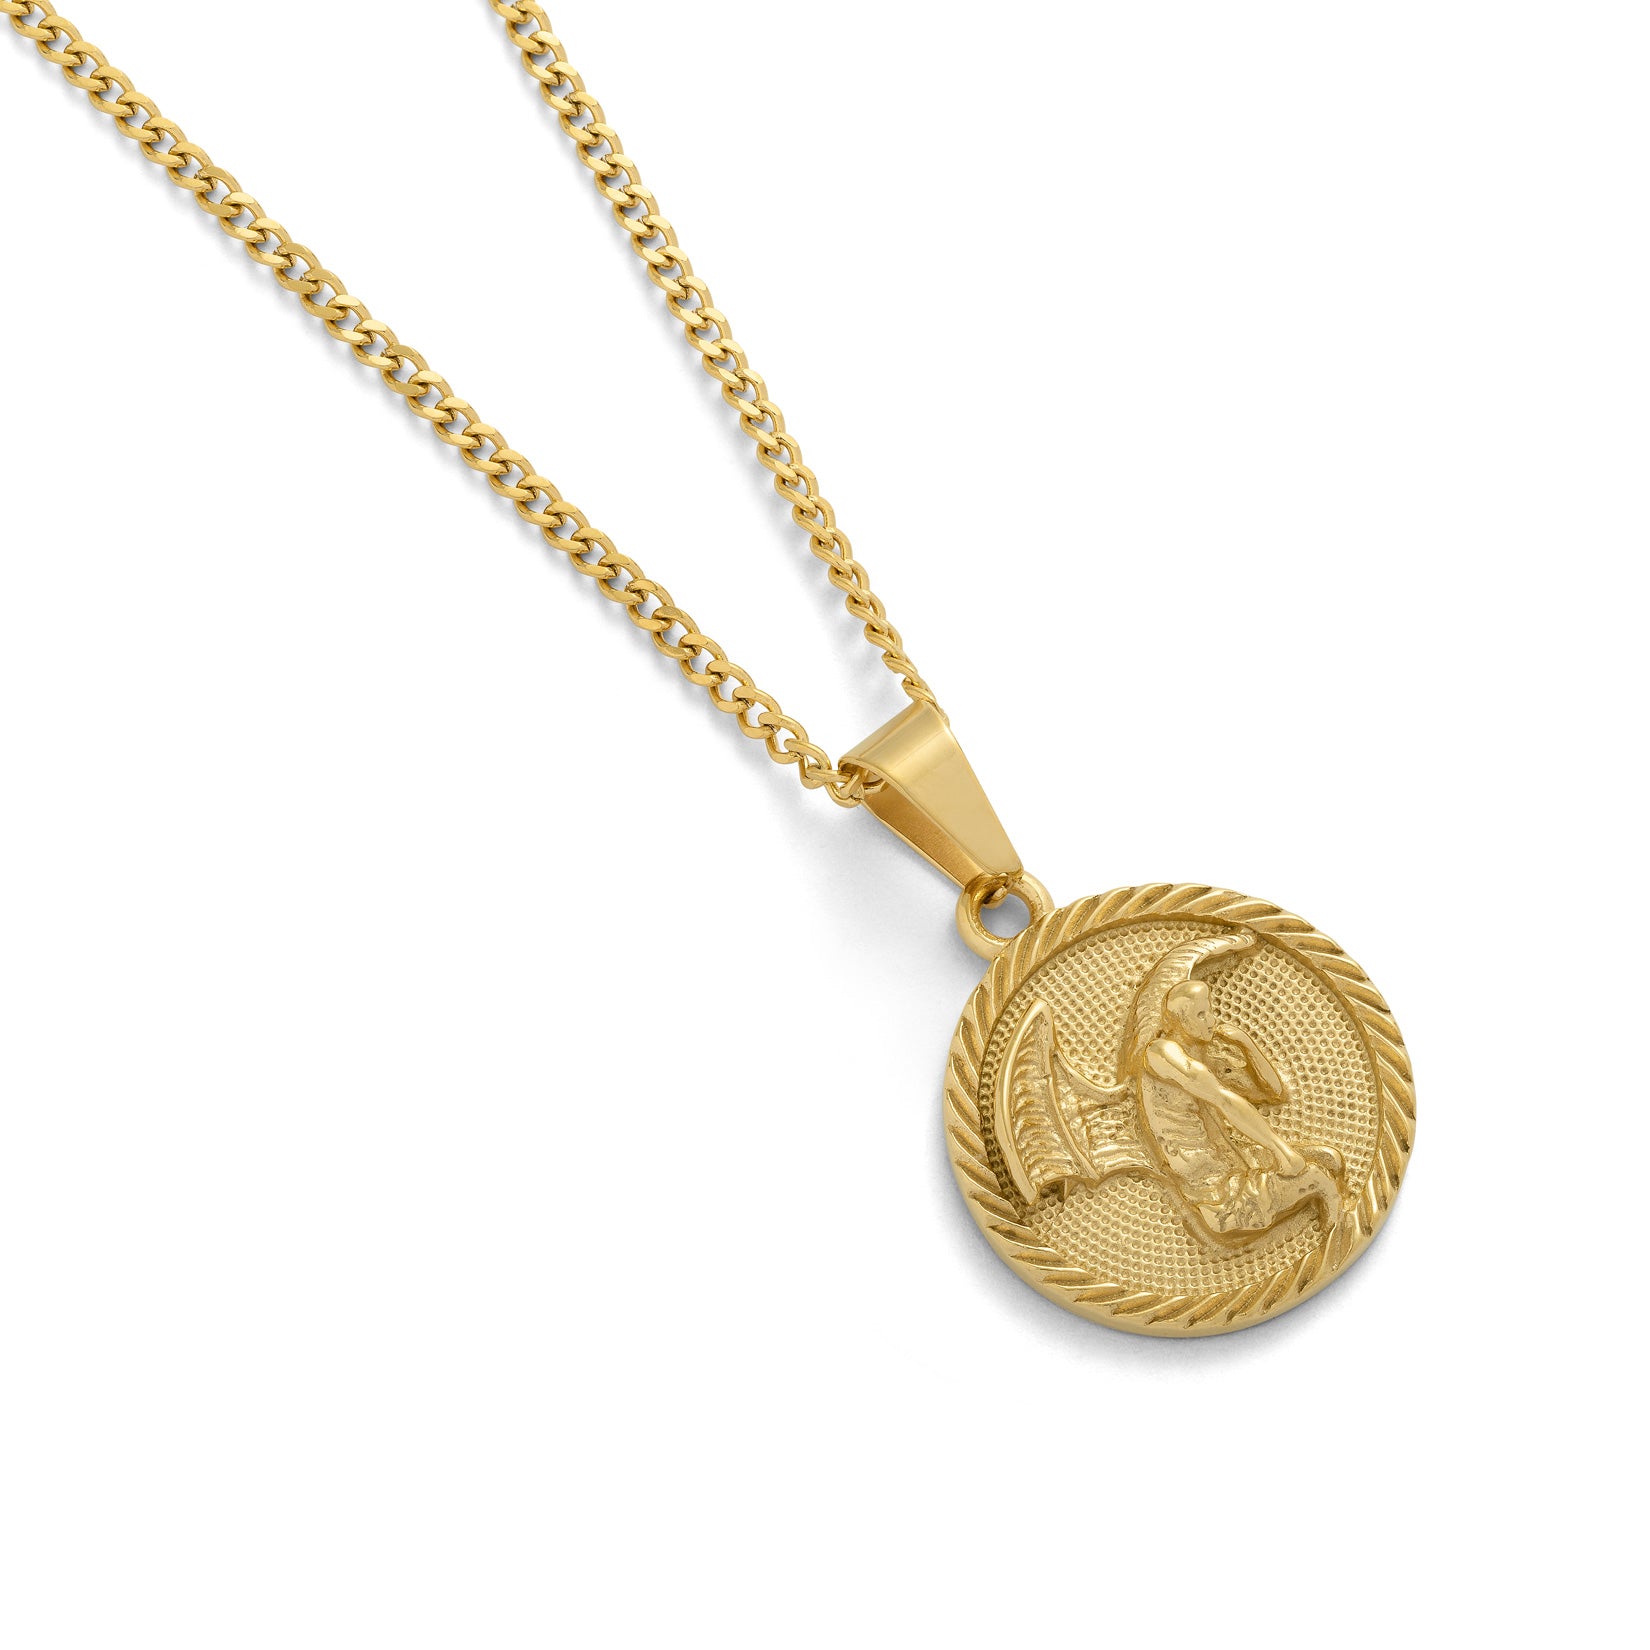 Gold Angel medallion on chain by statement